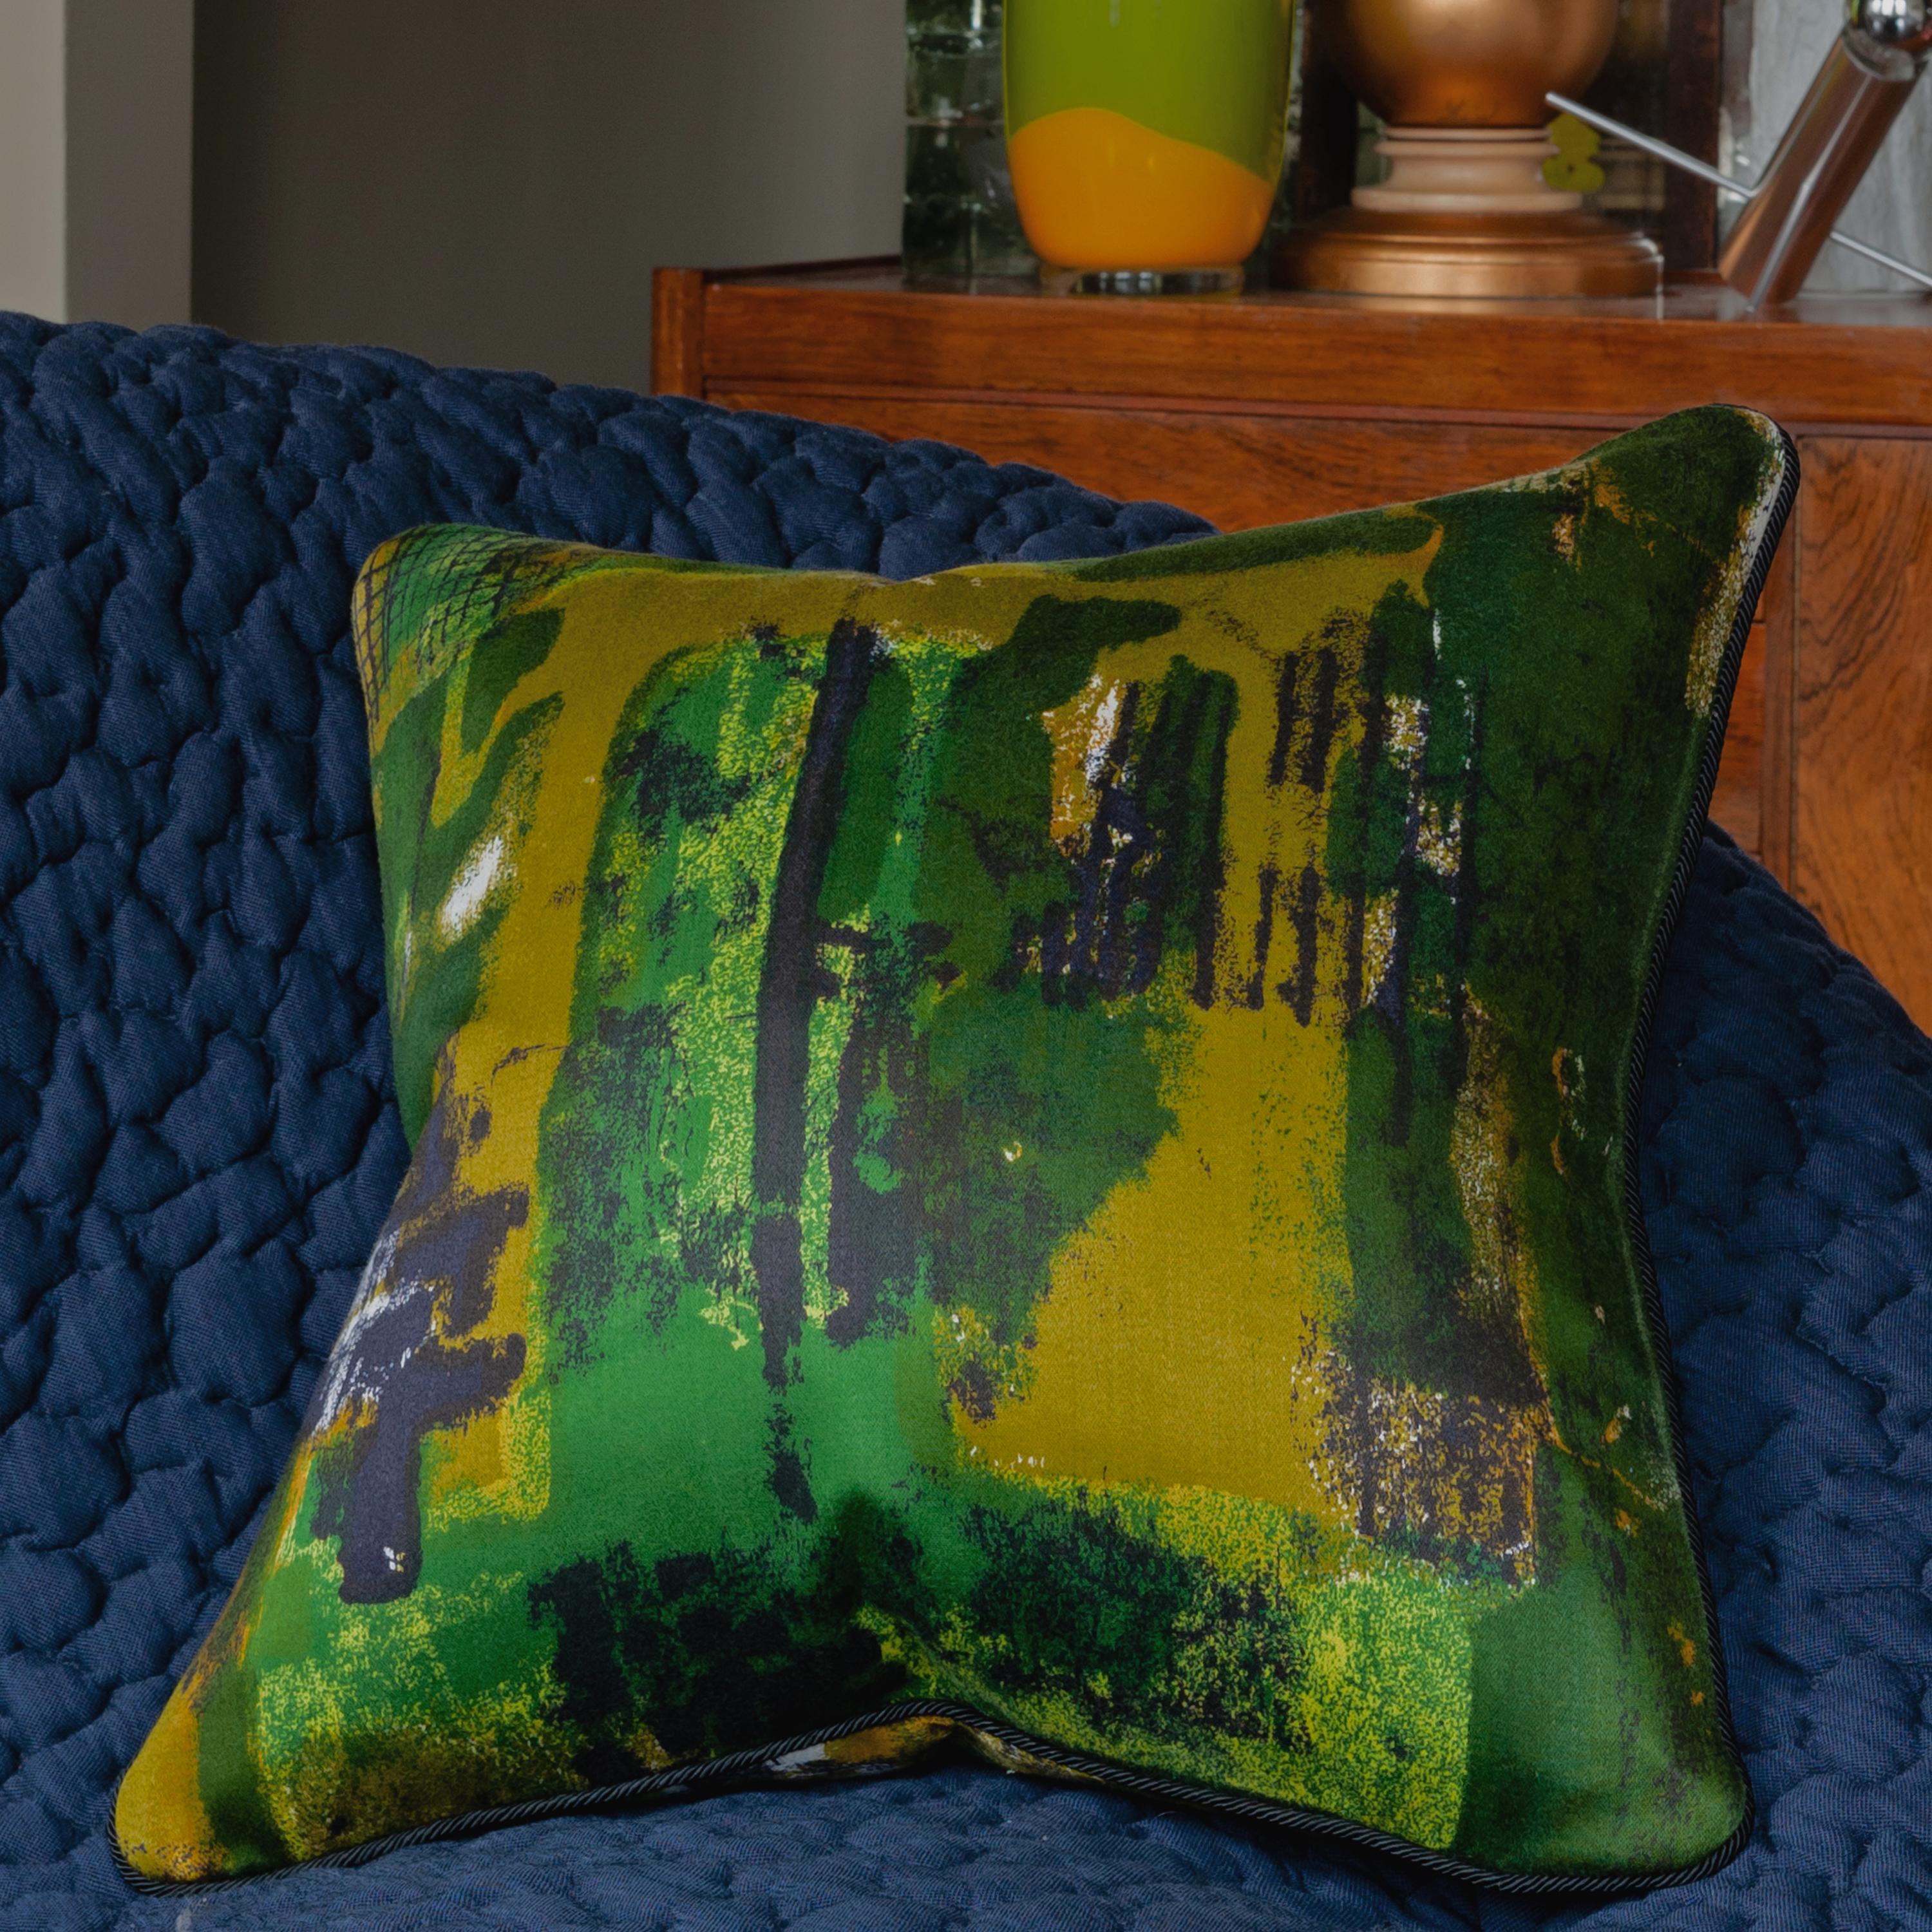 Vintage Cushions, 'Rhapsody',
circa - 1950
British bespoke luxury cushion created using original mid-century cotton furnishing fabric. The selvedge details ‘A Francis’ Screen print. Printed in VAT colours, the richness of colours is an excellent